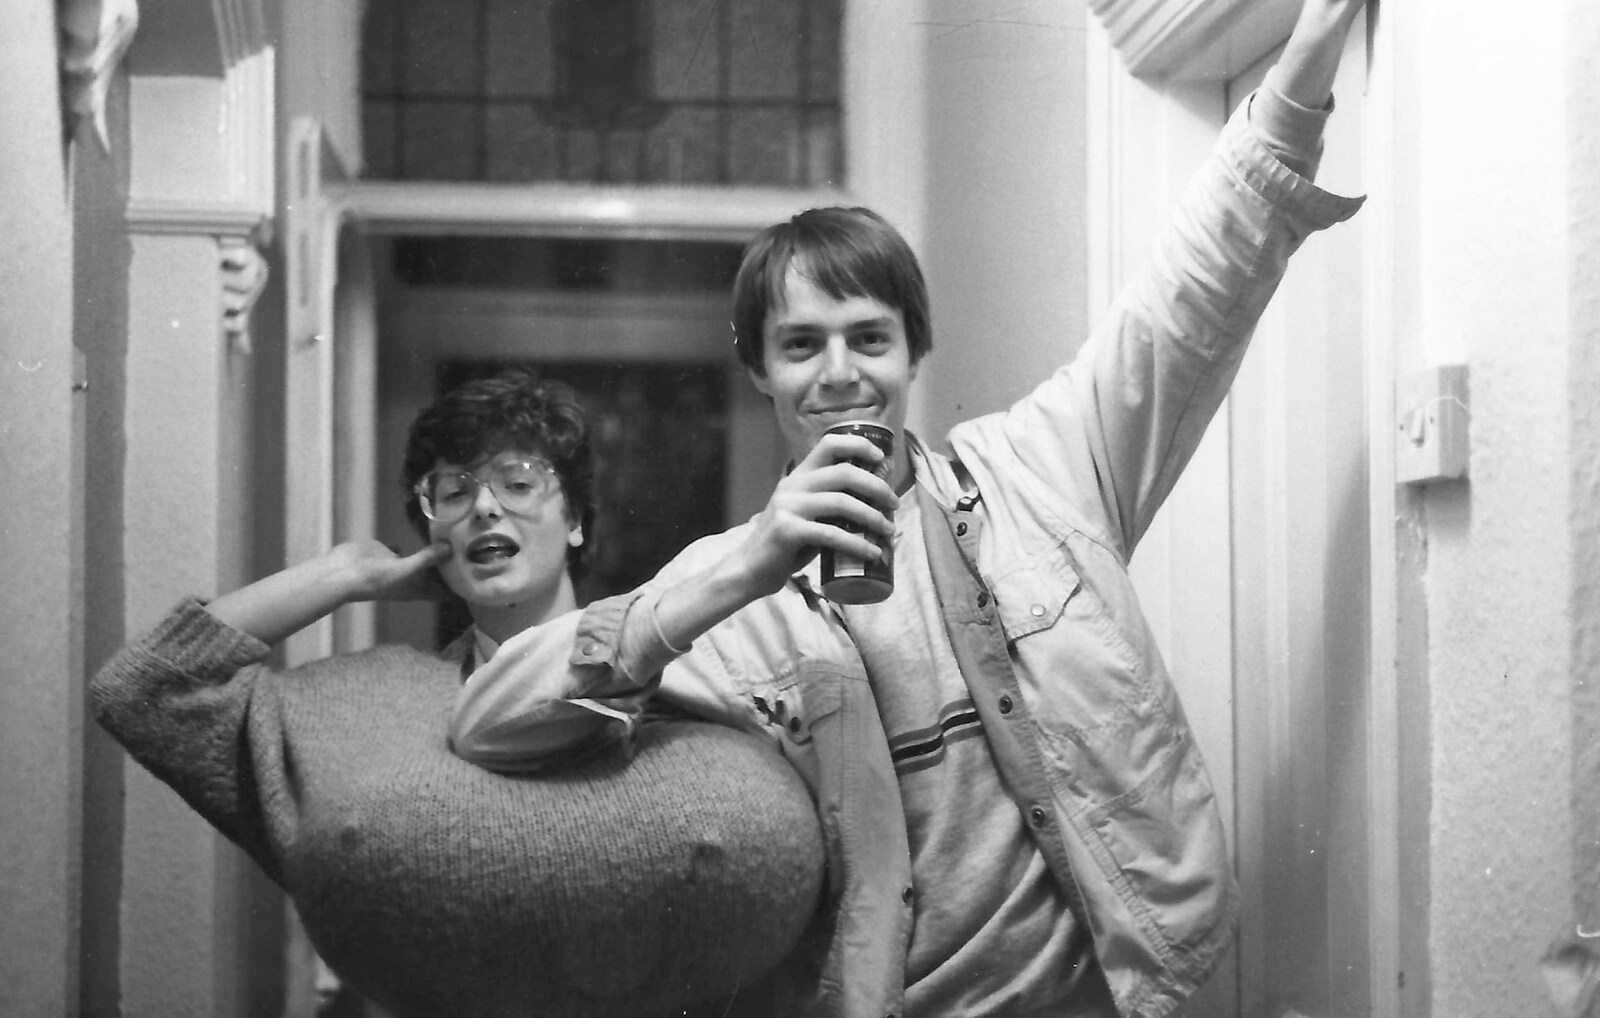 Bee and Malcolm from Uni: The First Year in Black and White, Plymouth Polytechnic, Devon - 8th April 1986